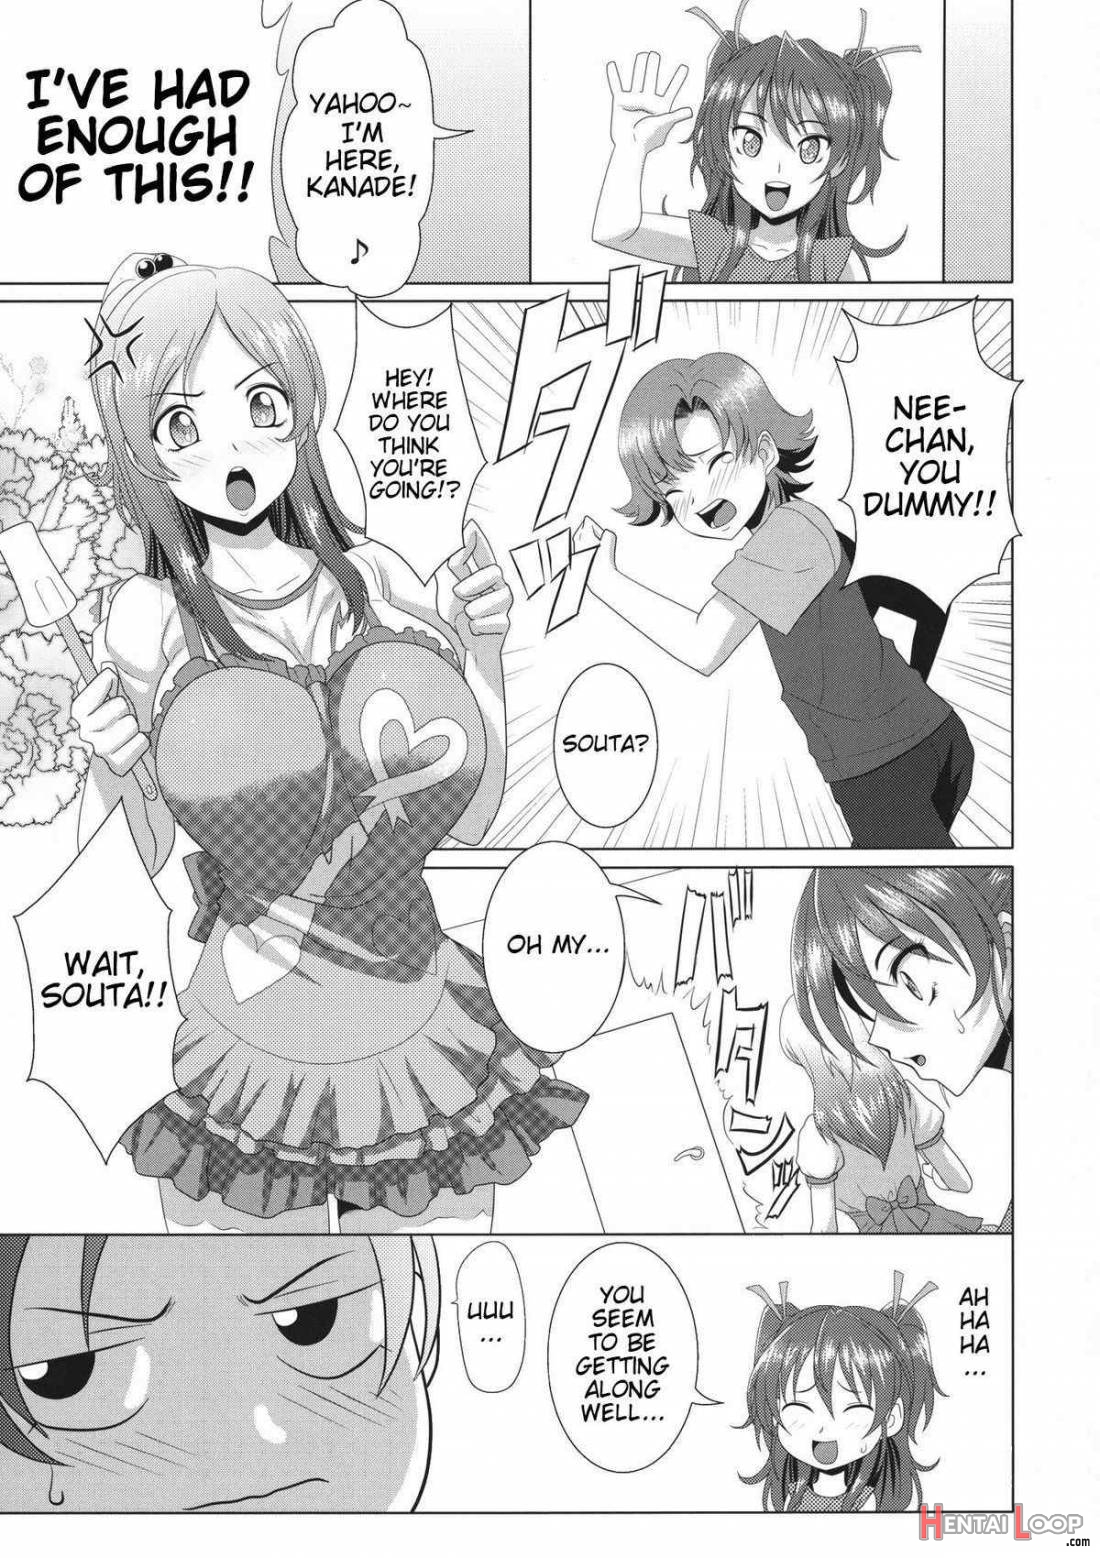 Suite Oppai page 2